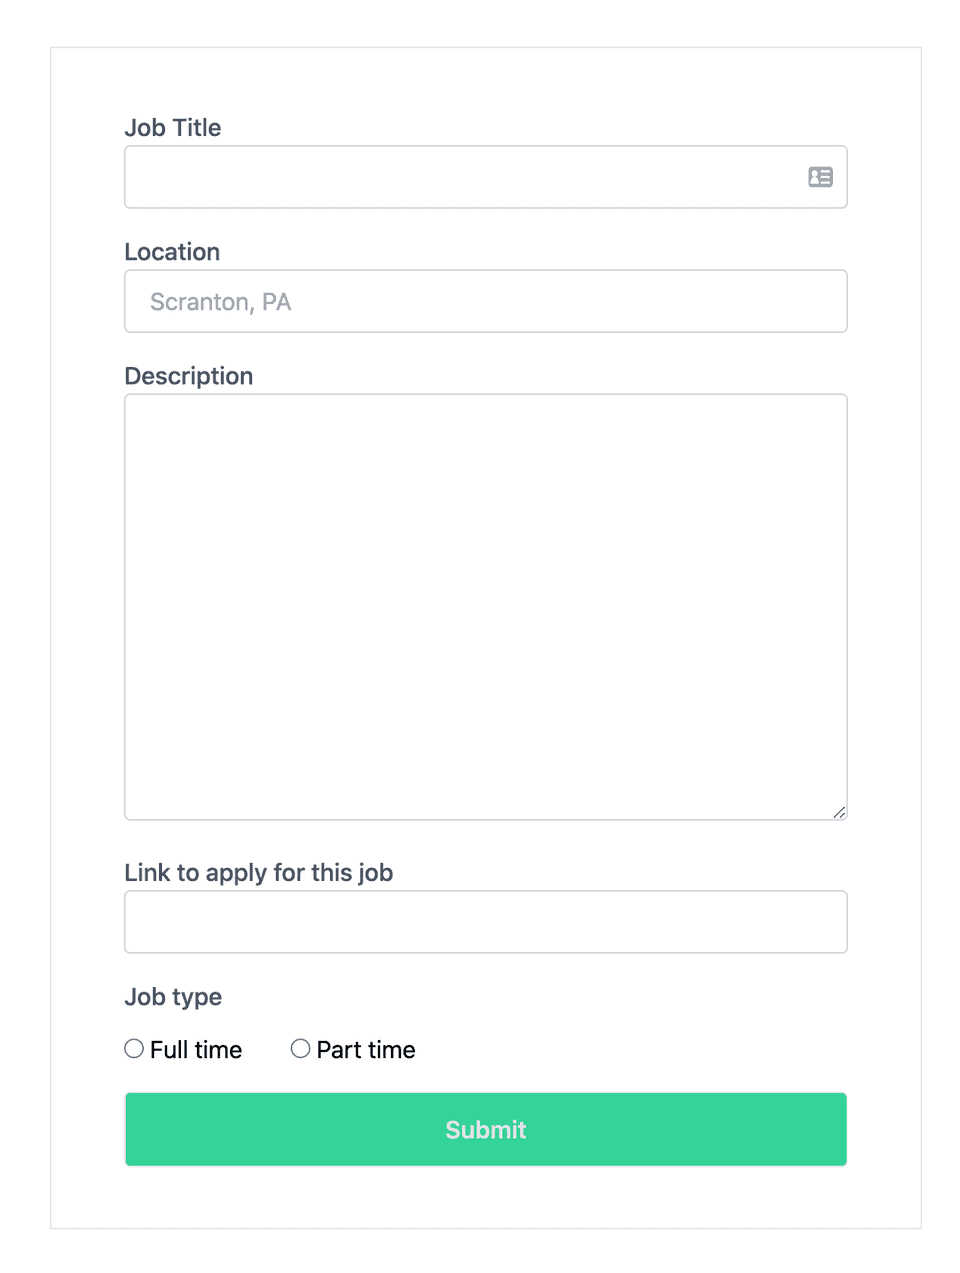 React Tailwind CSS form